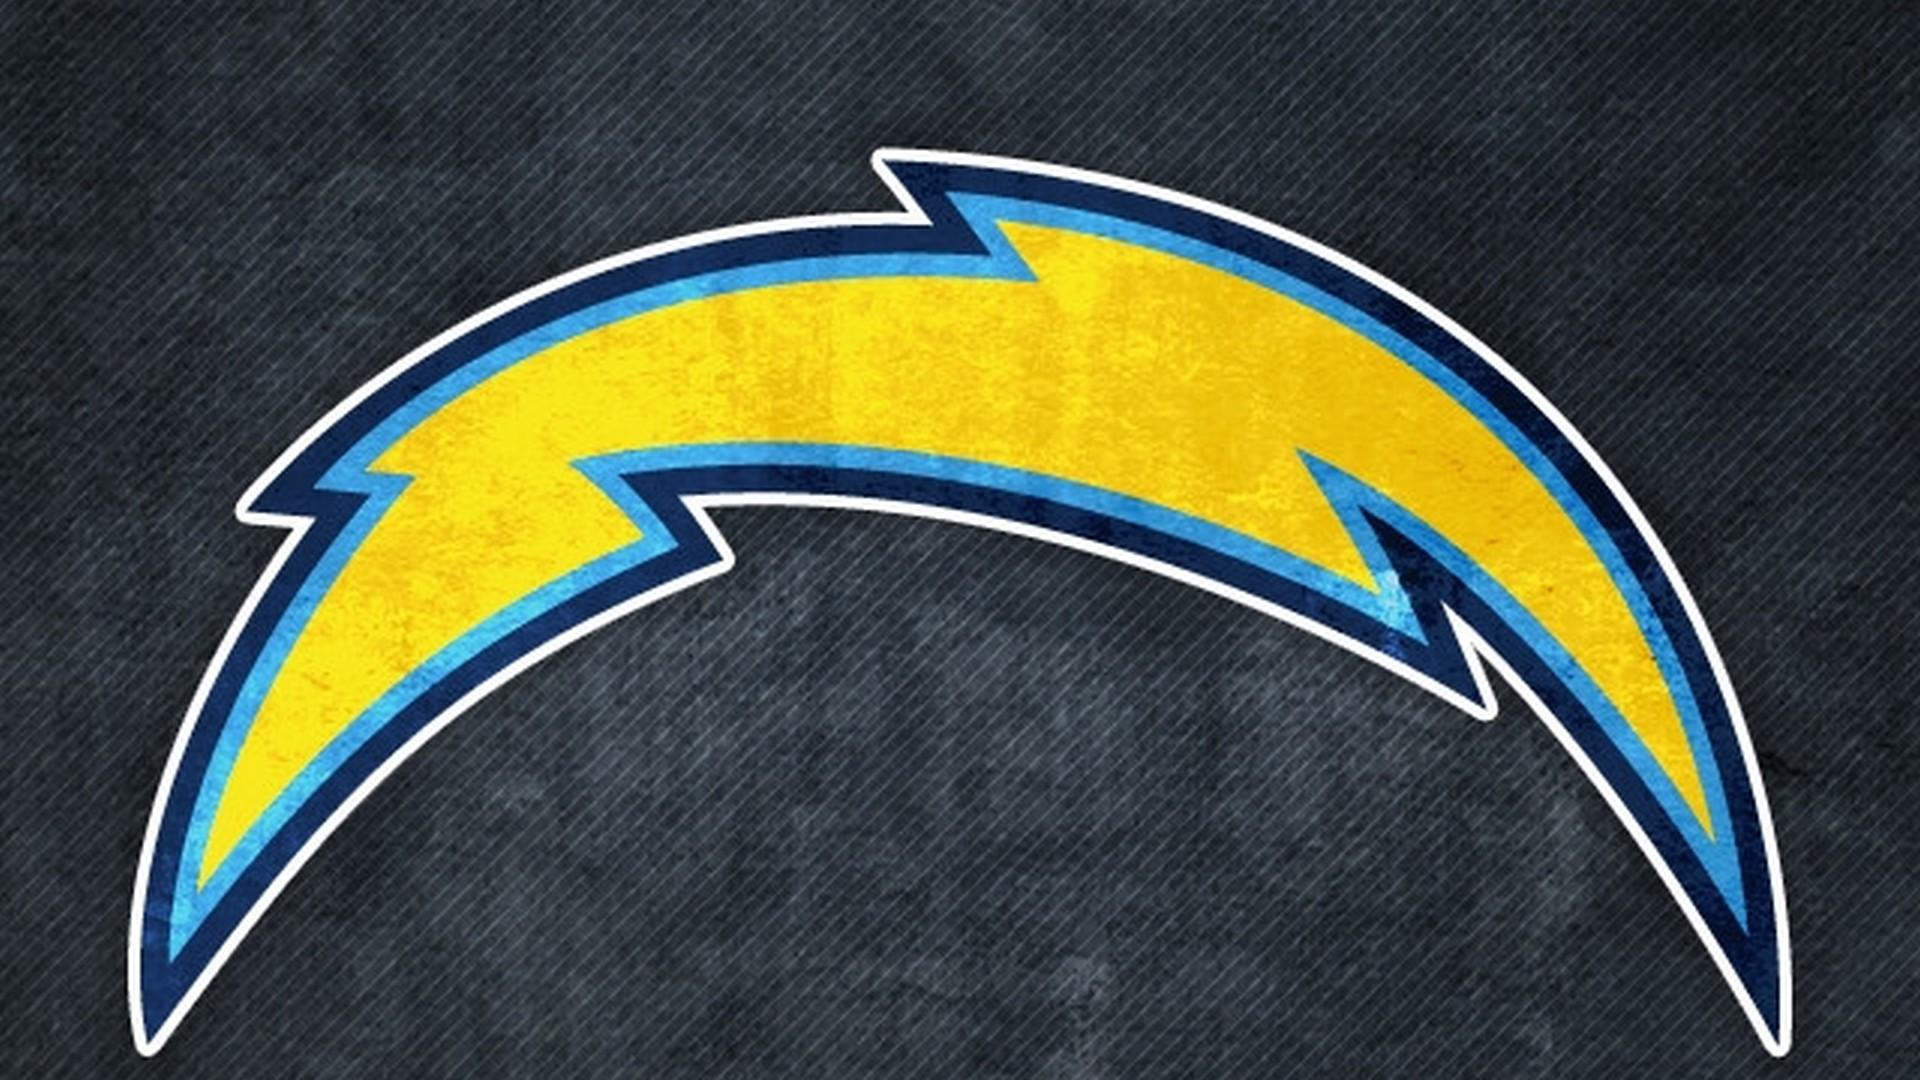 Los Angeles Chargers Wallpapers  Top 50 Best Los Angeles Chargers  Wallpapers  HQ 